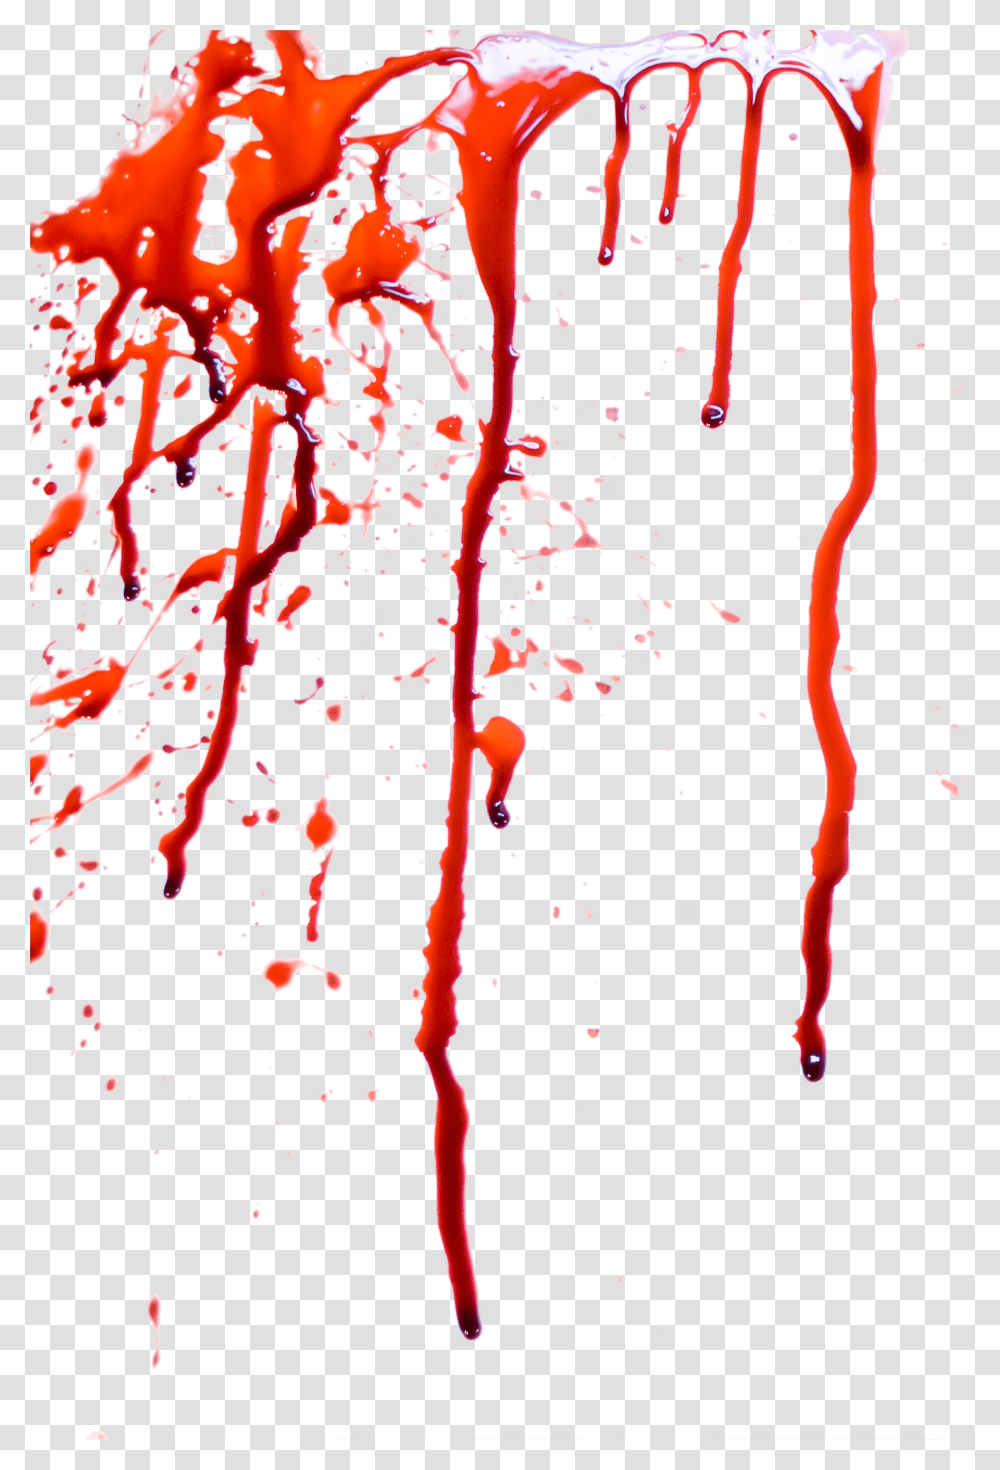 Blood From Mouth, Modern Art, Stain Transparent Png